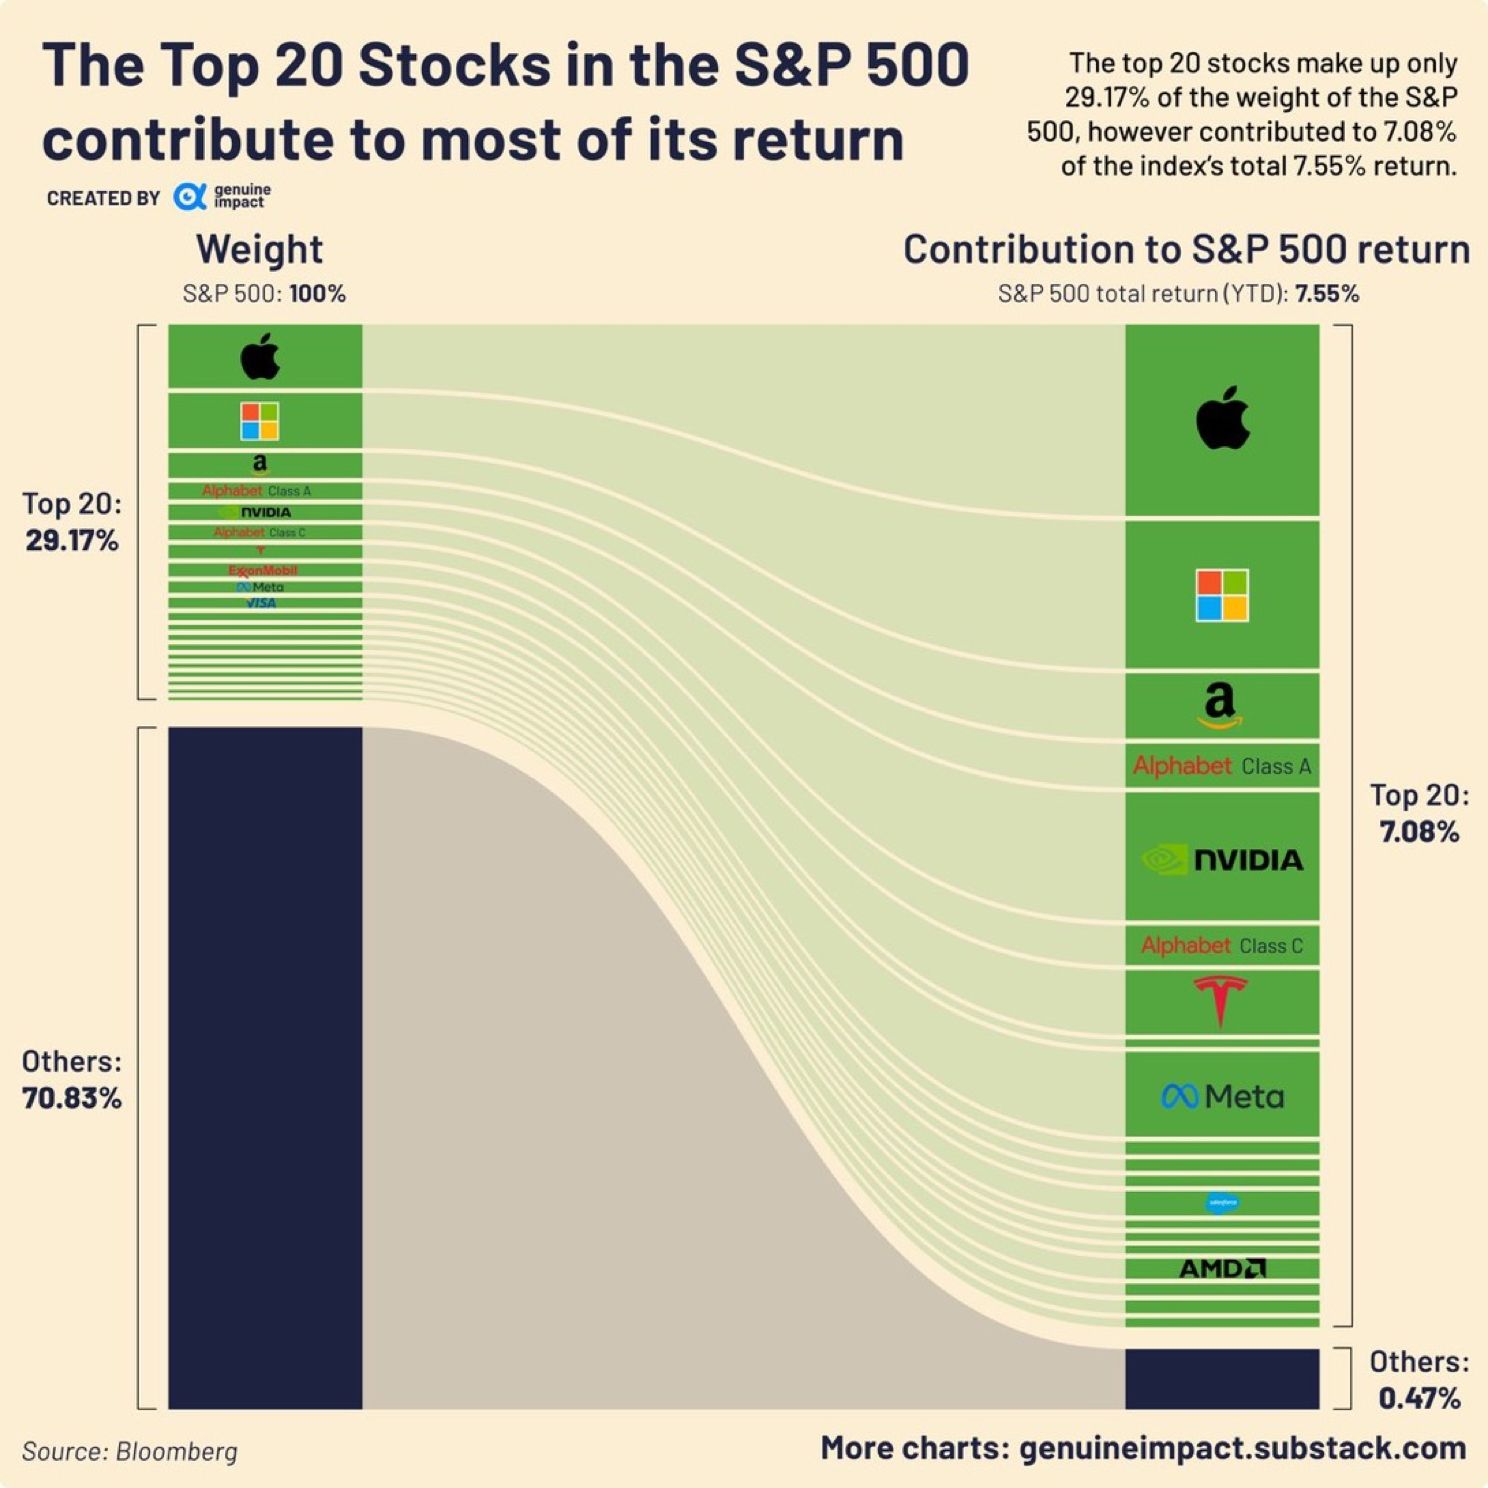 Concentration Alert! A handful of tech stocks are responsible for a large portion of stock market returns lately